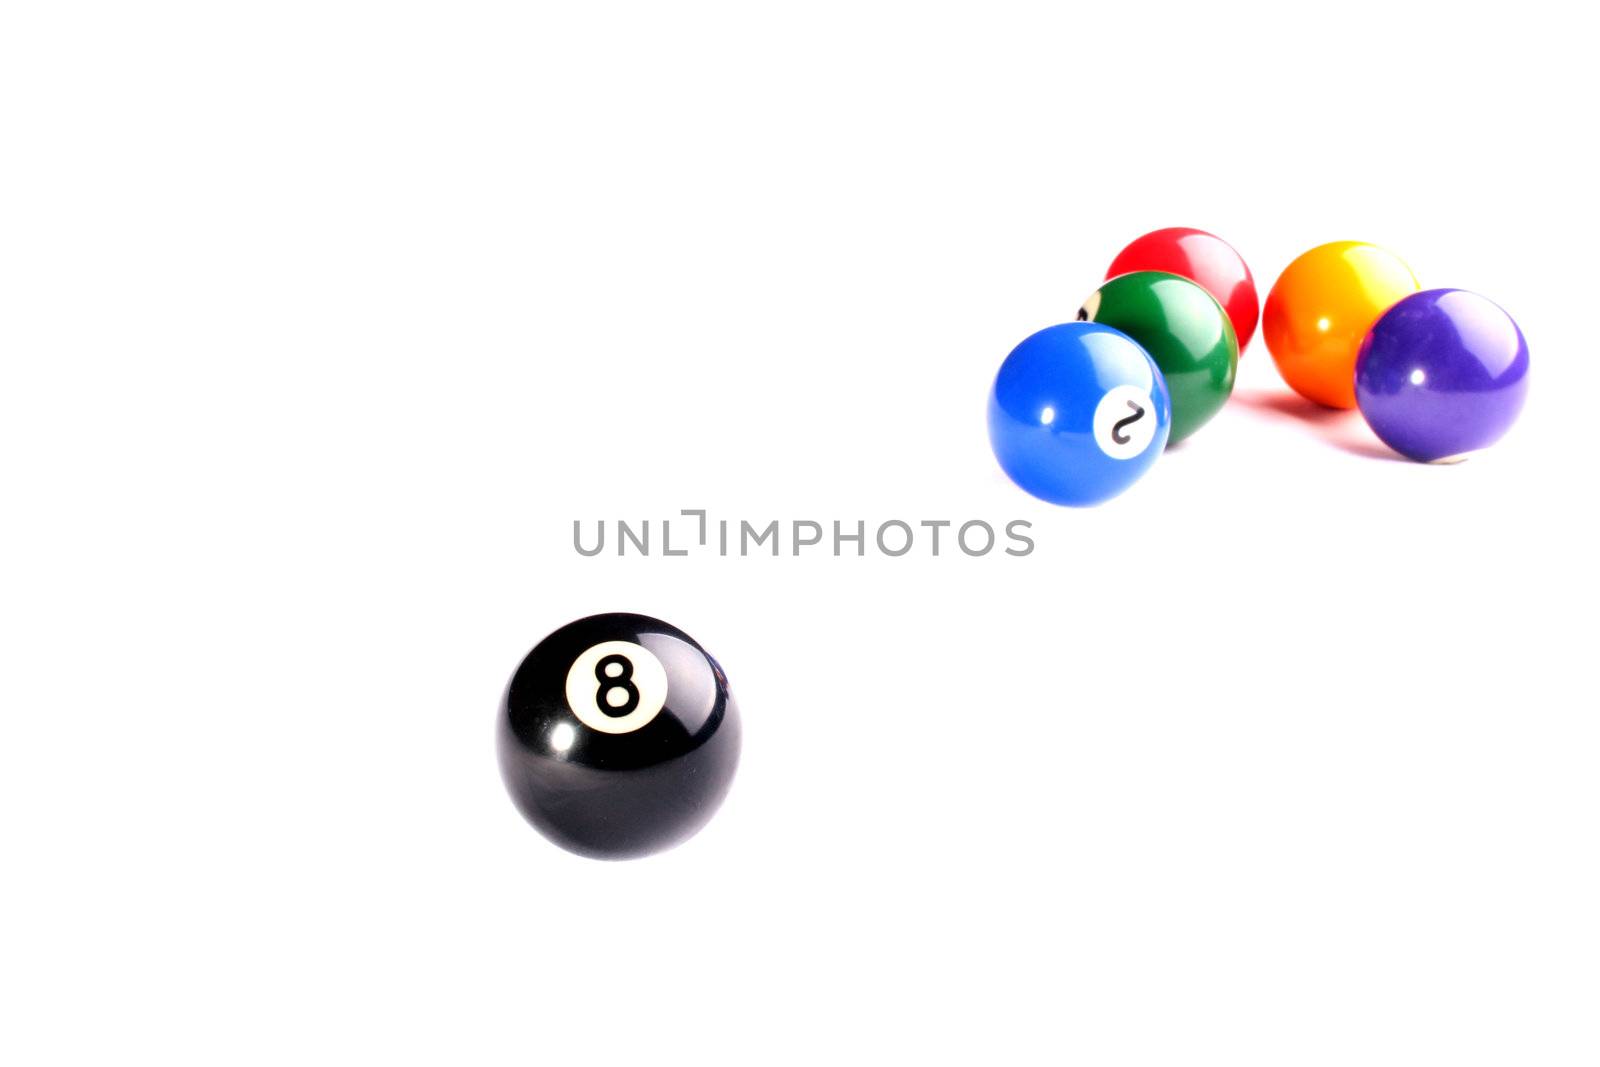 Billiard spheres on a white background, ahead a black sphere with number 8.